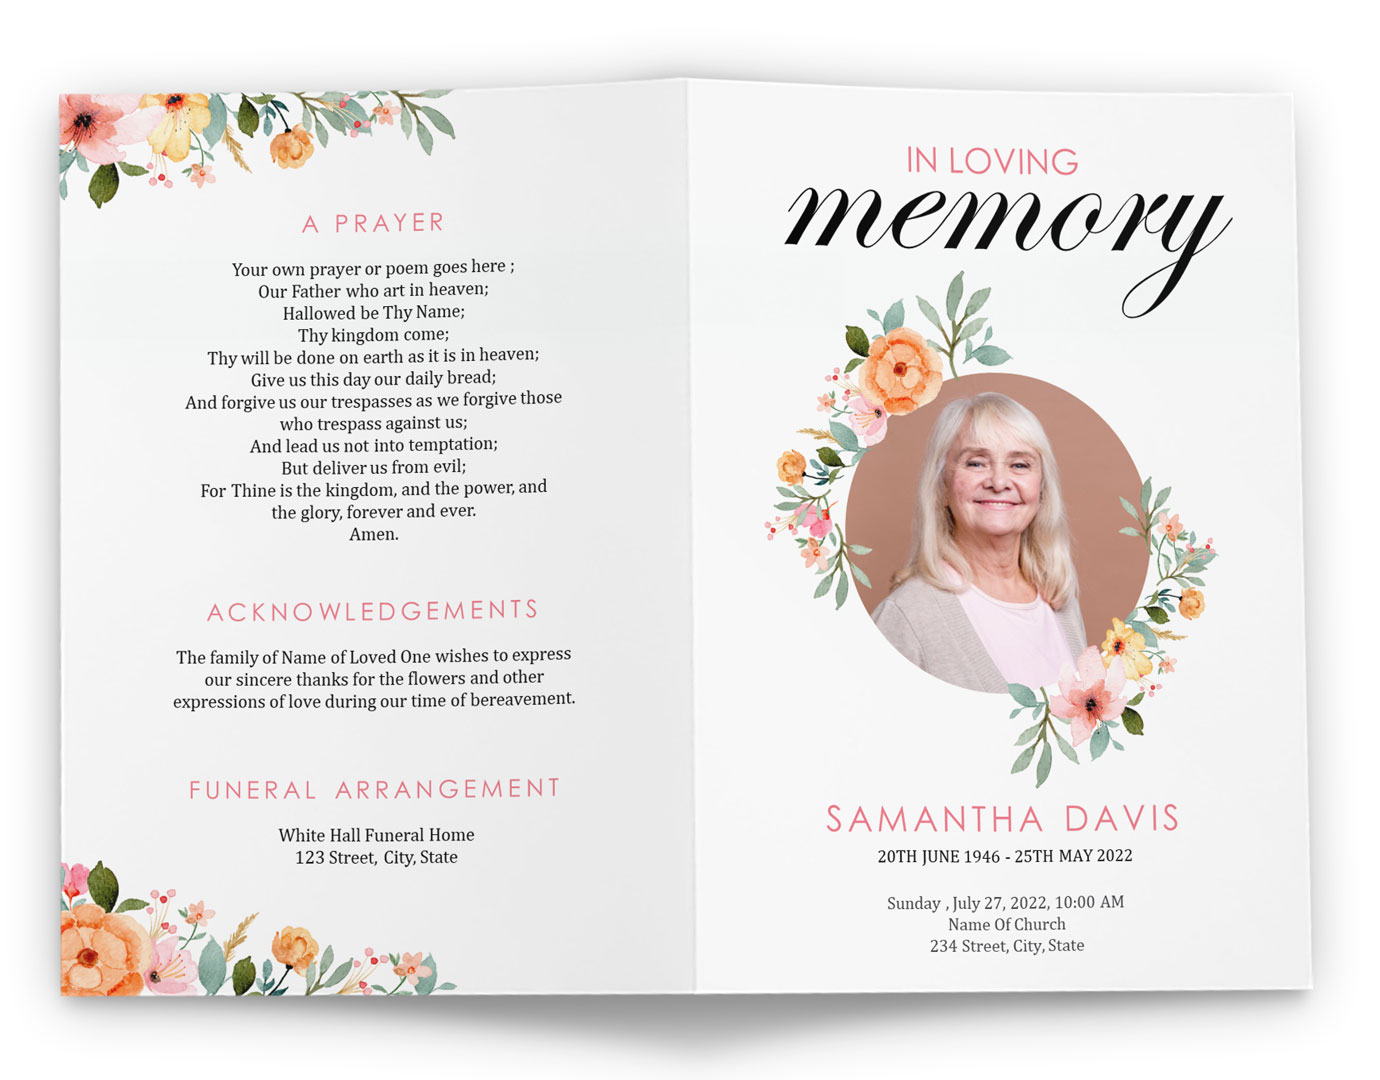 Download Funeral Pamphlet Template For A Beautiful DIY Funeral Inside Memorial Brochure Template